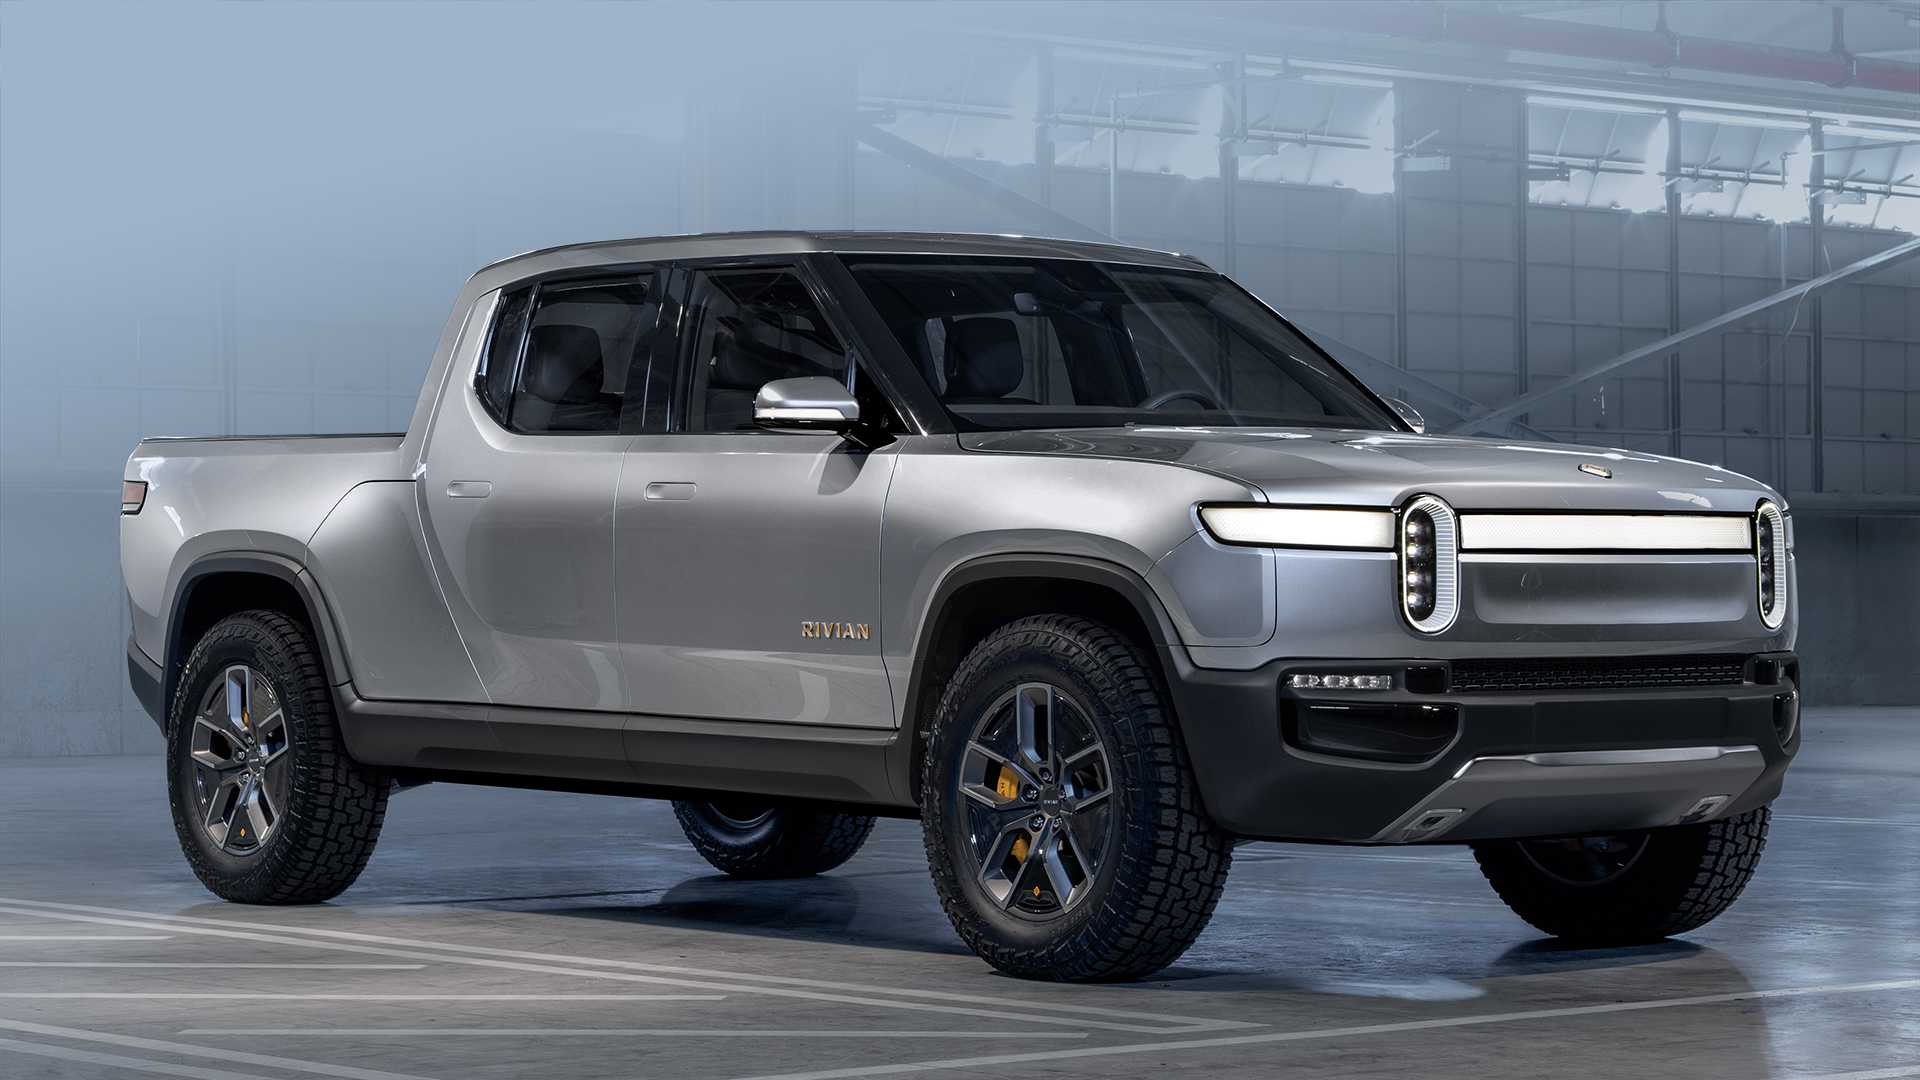 rivian plans to build 40k cars in the first year